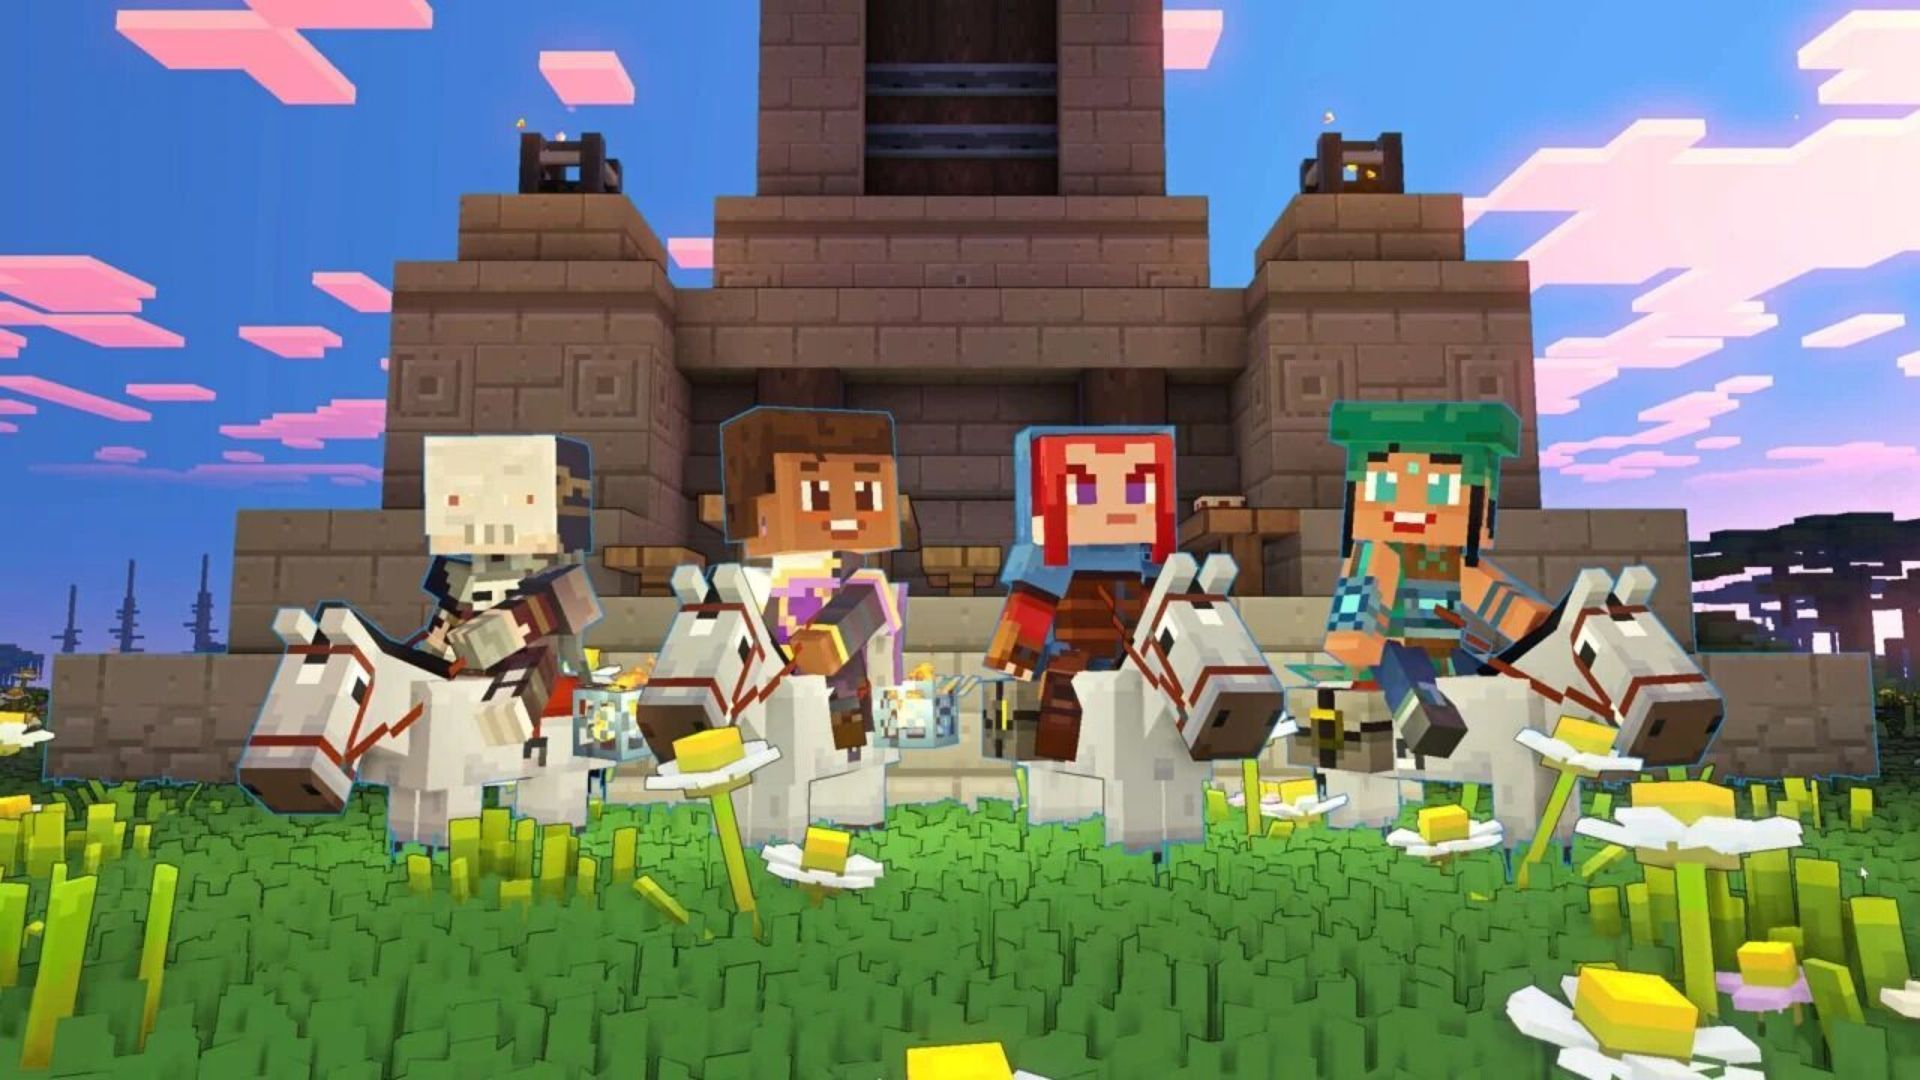 What We Know About The LiveAction Minecraft Movie Releasing In 2025